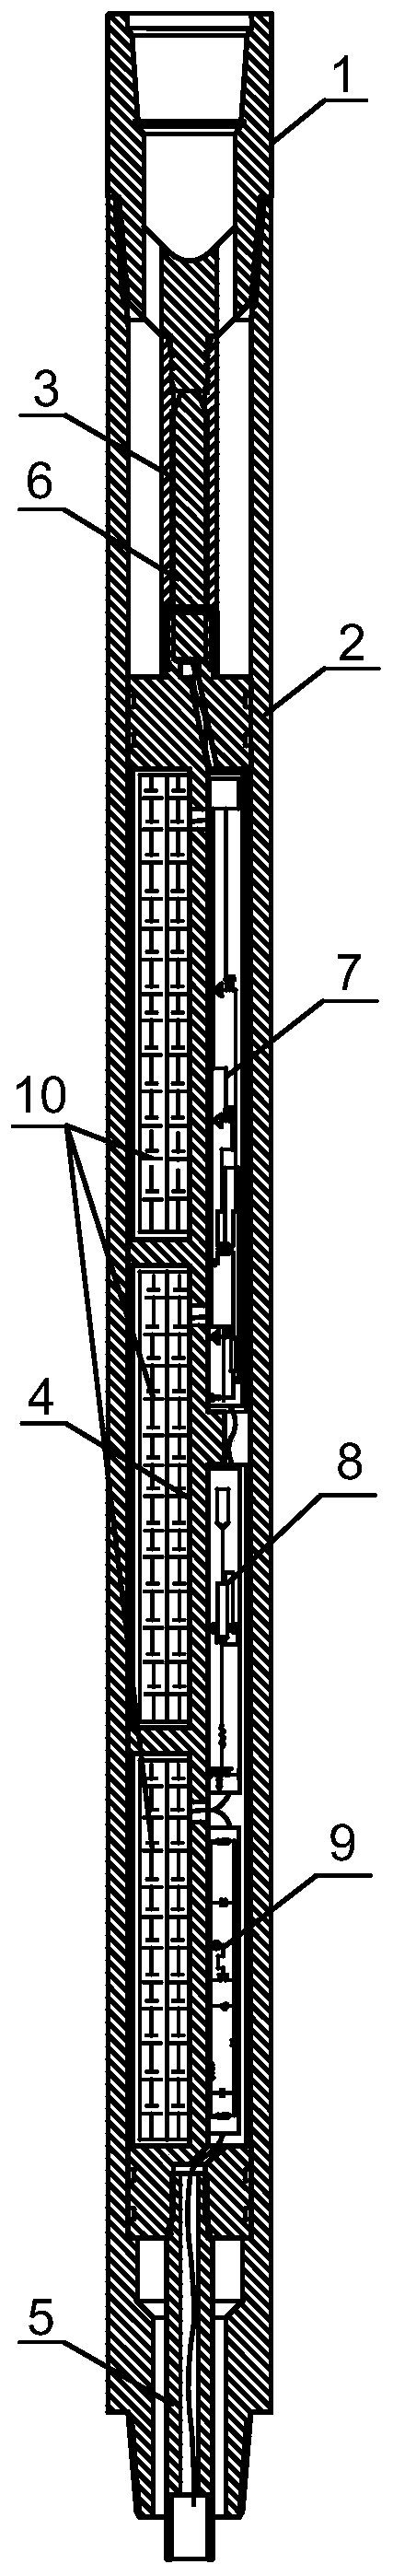 Downhole Information Acoustic Signal Generation System